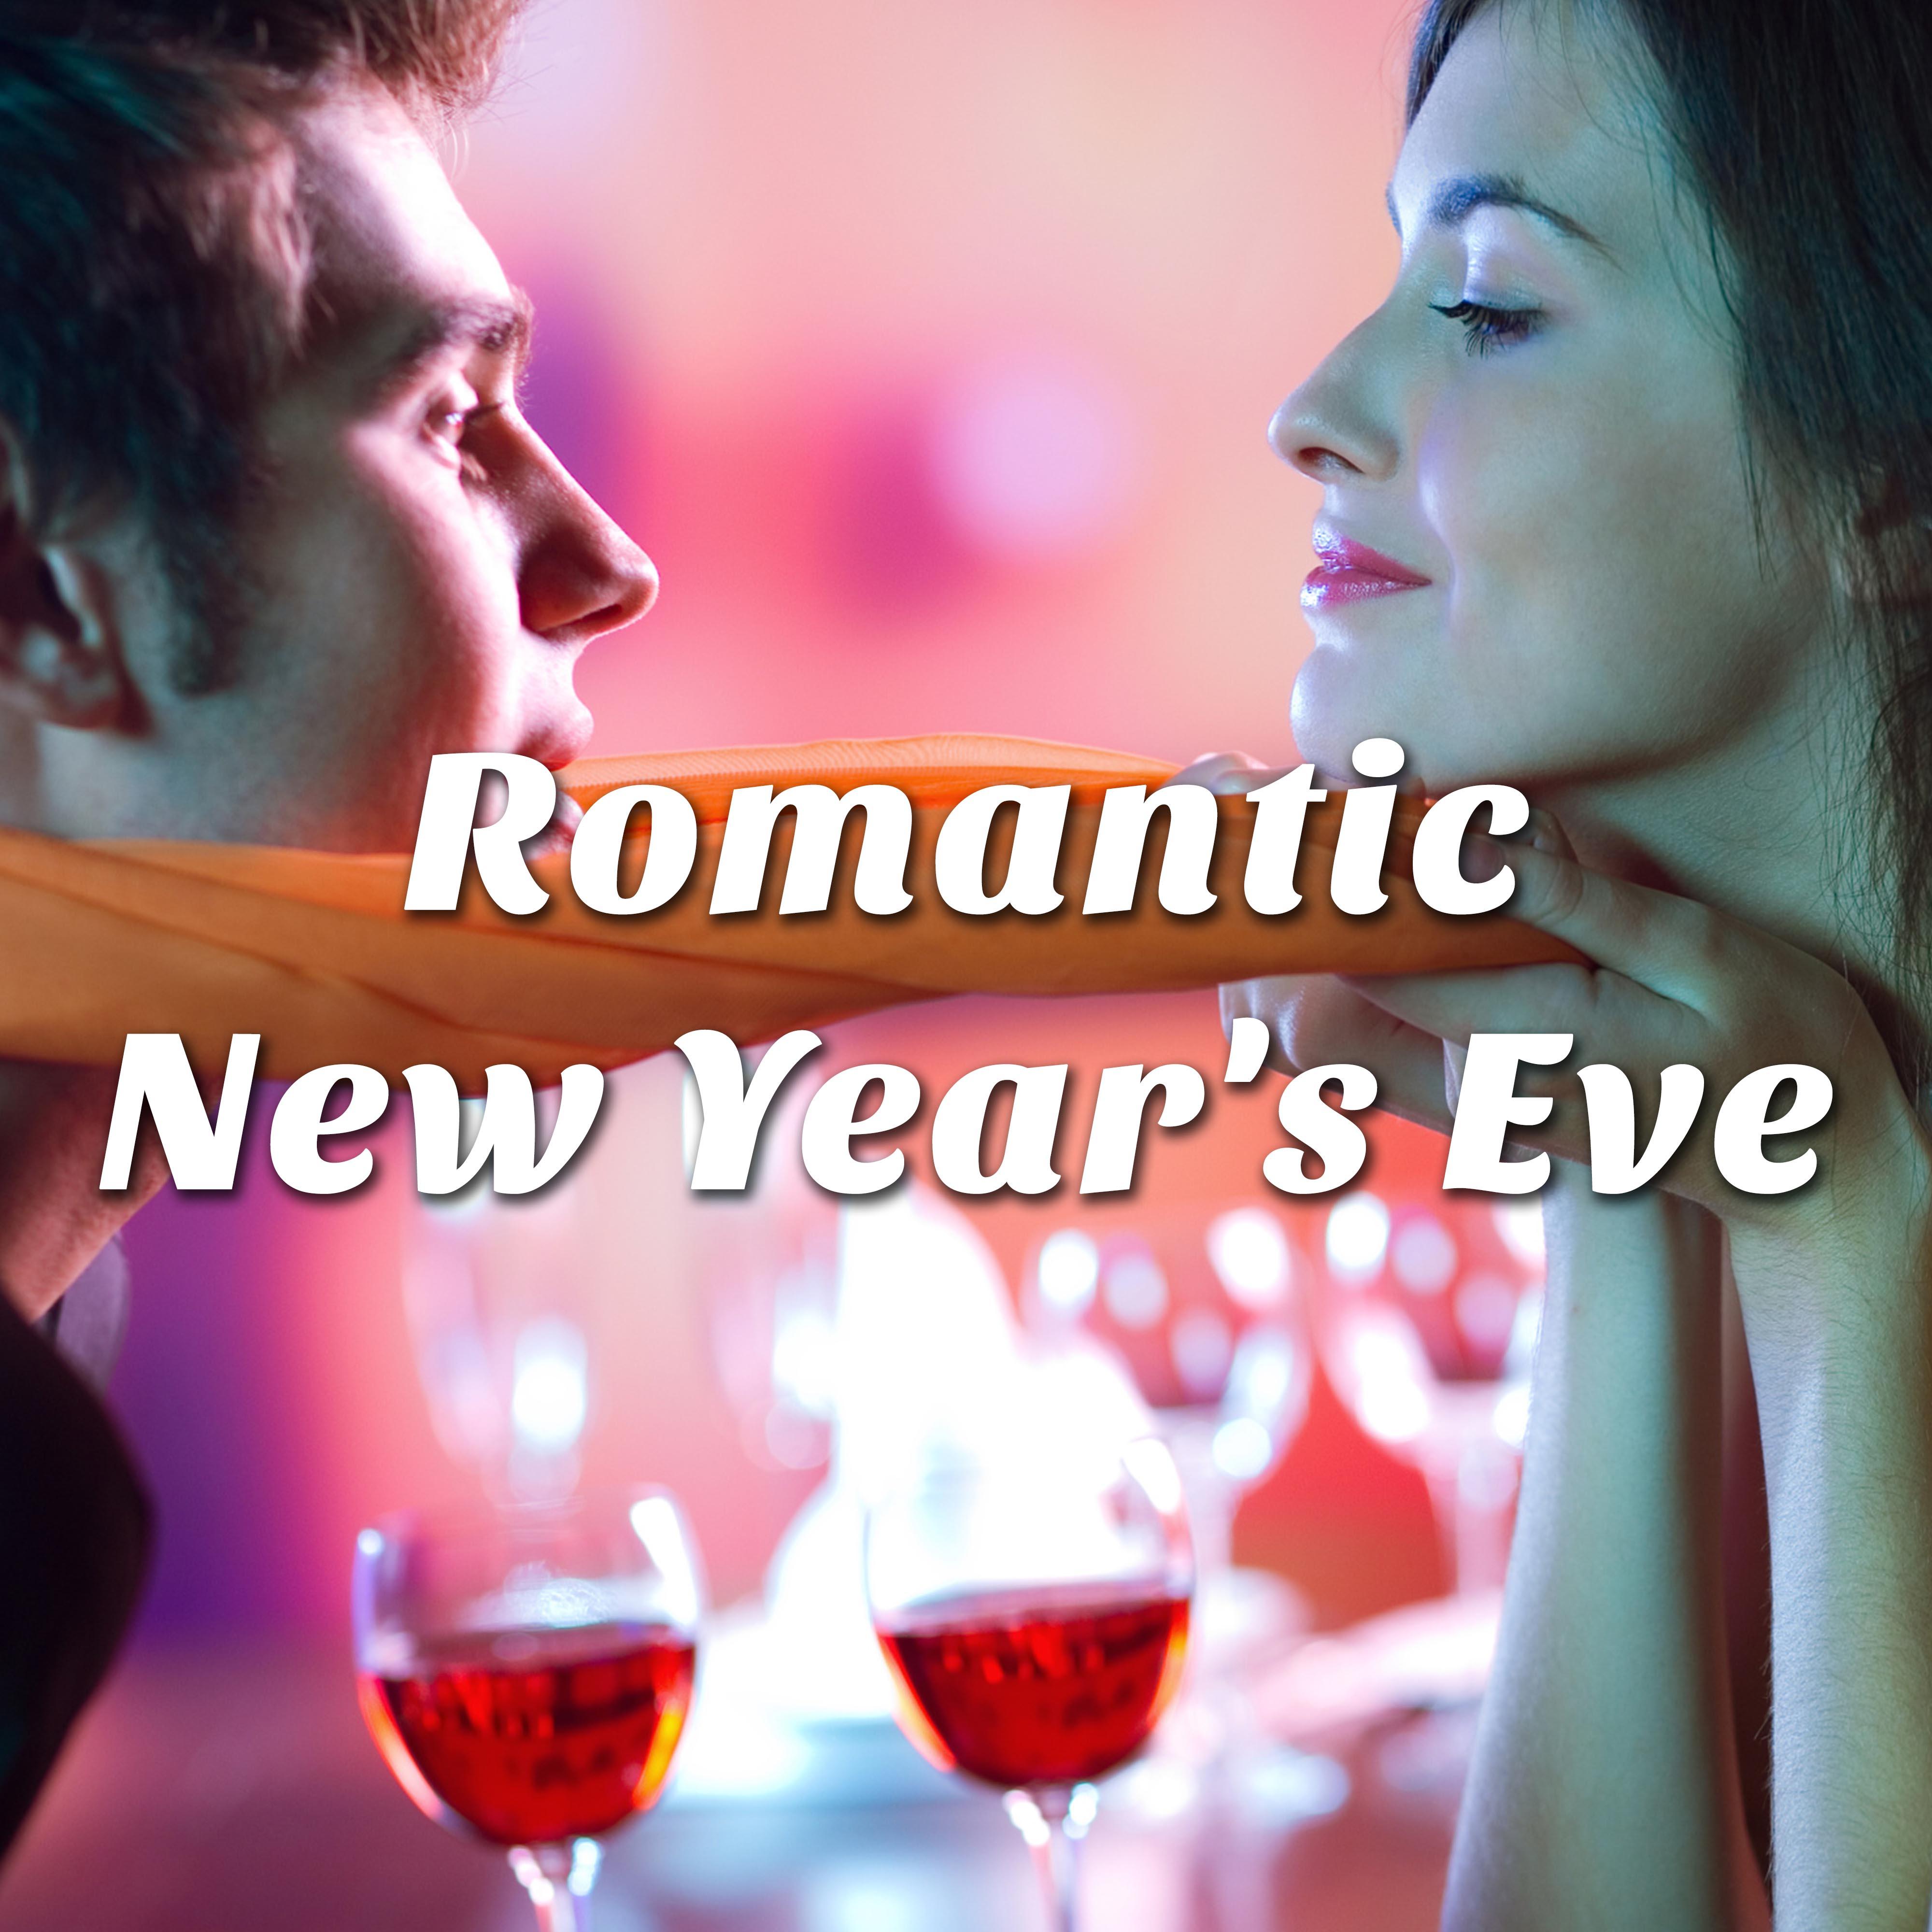 Romantic New Year's Eve: the Ultimate Playlist for Lounge Parties, Dinner Time and Family Celebrations for the End of the Year, also good for Focus and Concentration